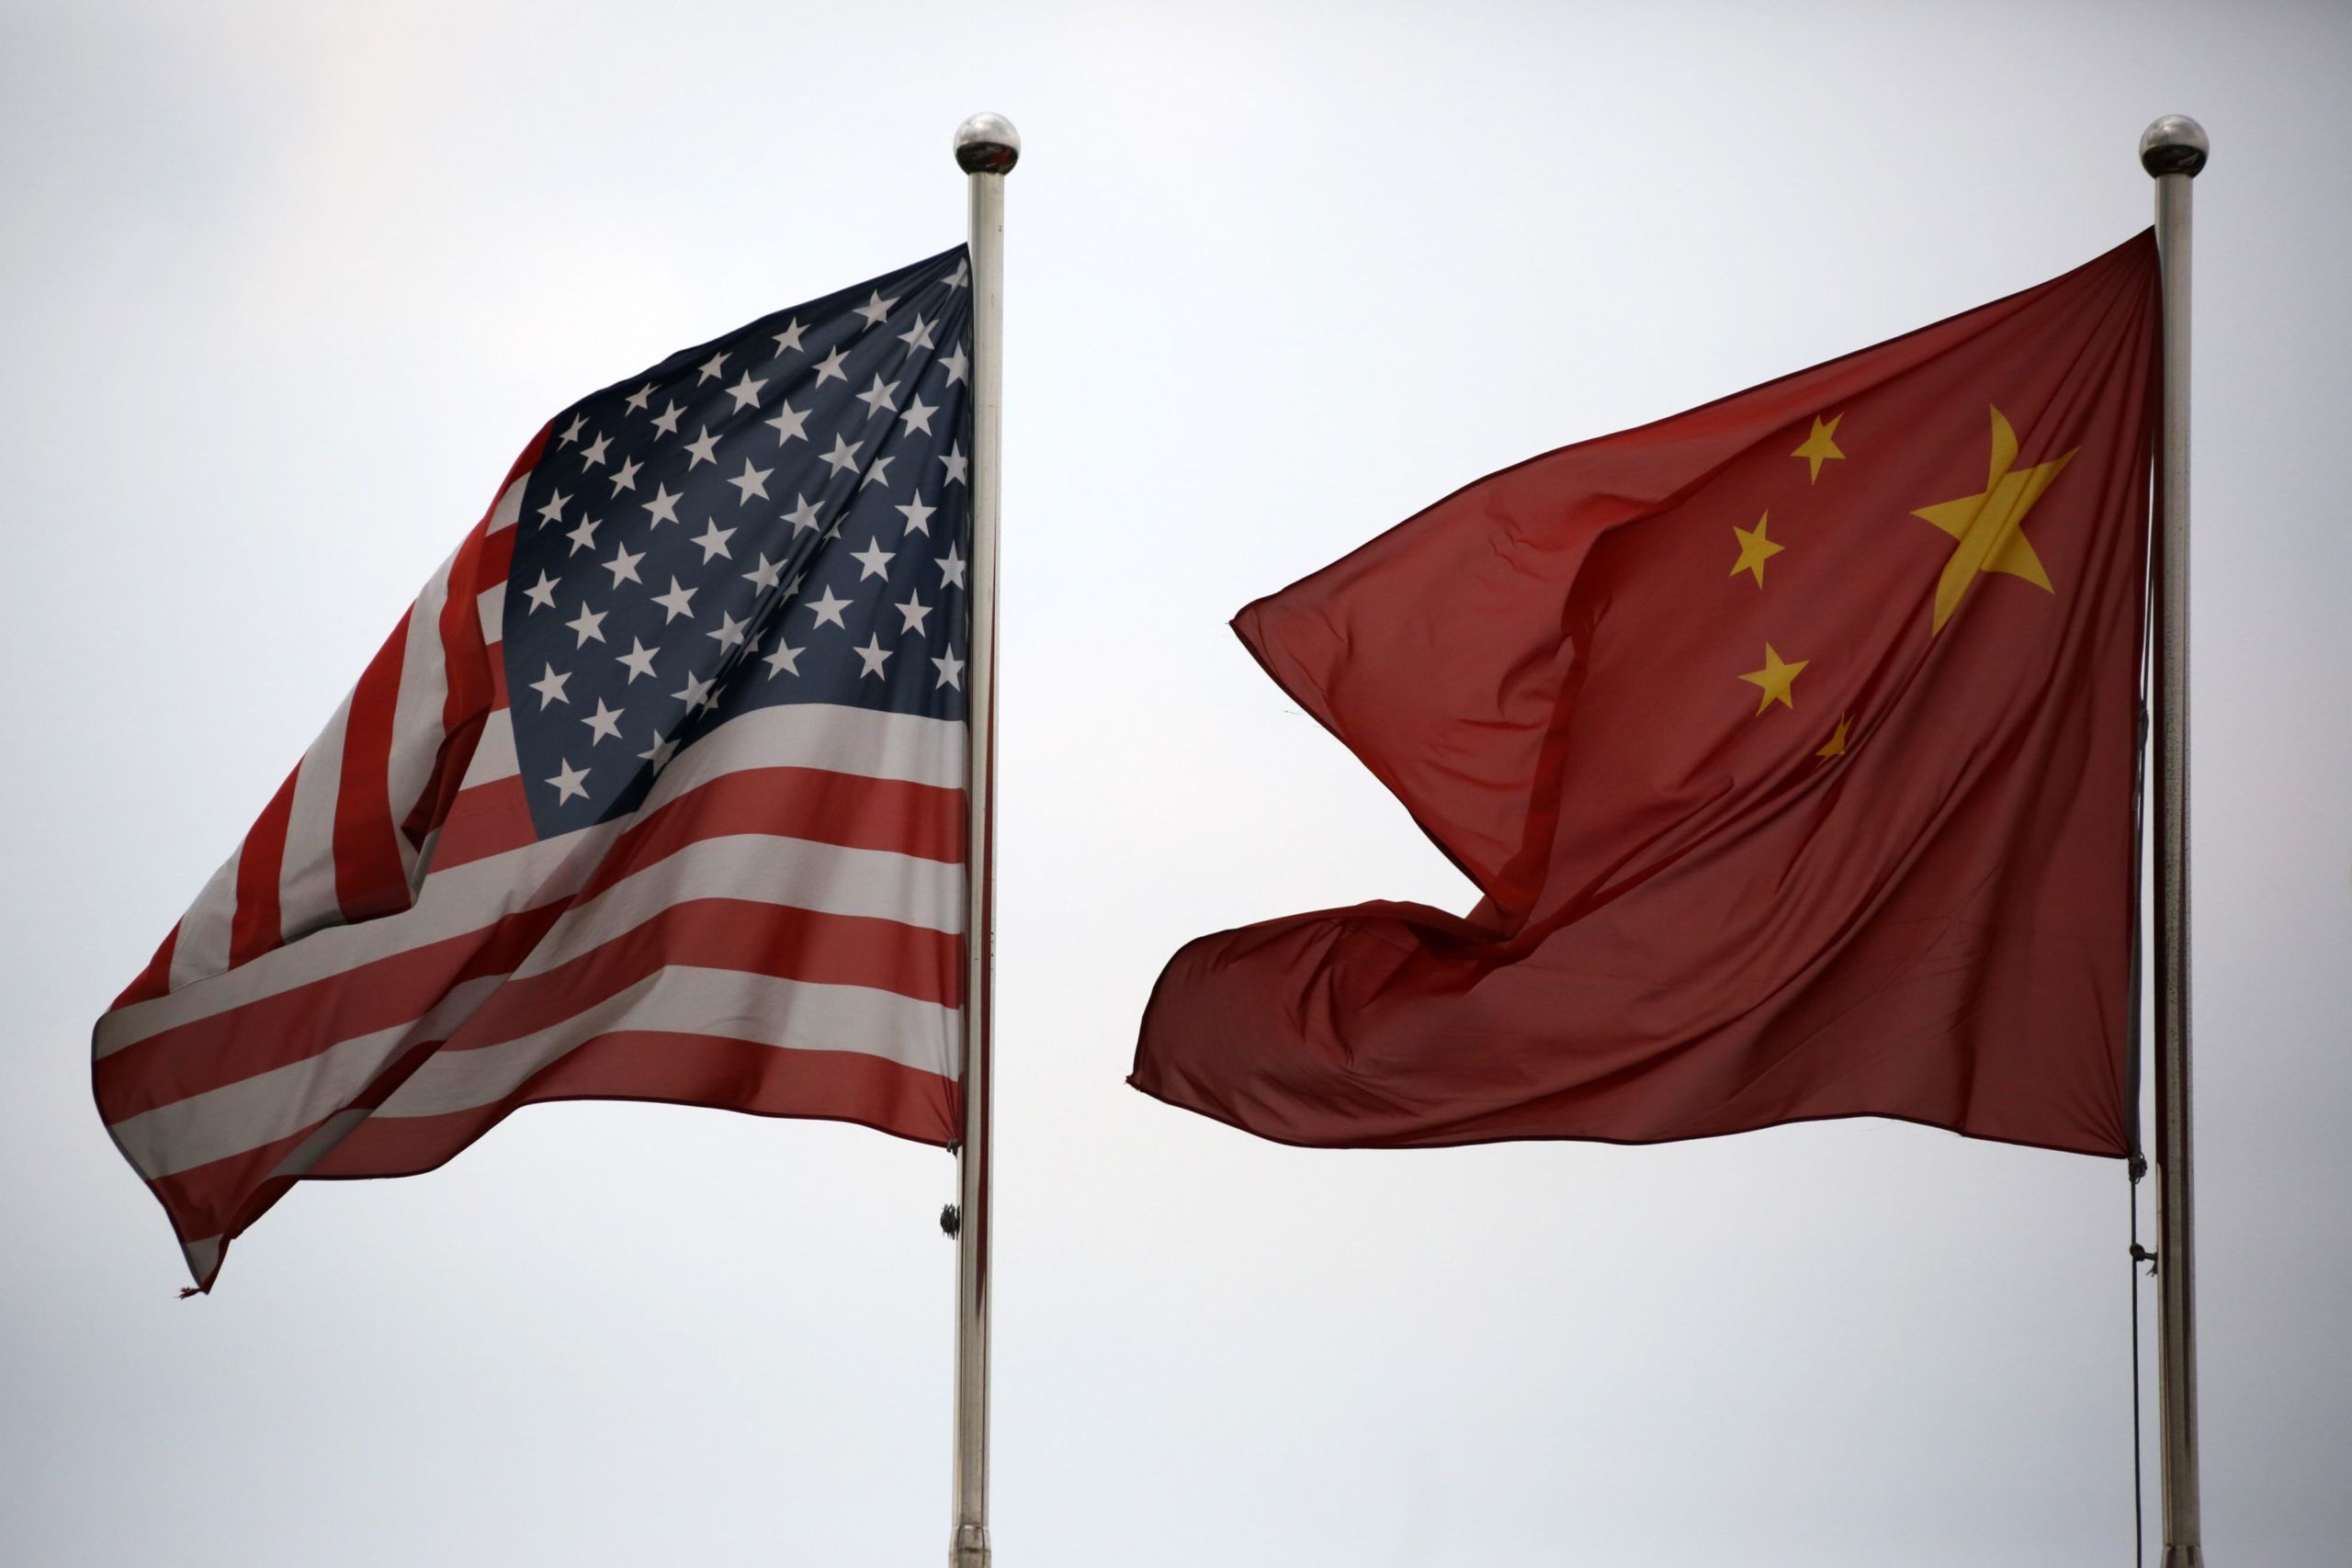 U.S. and Chinese national flags fly outside a company building.